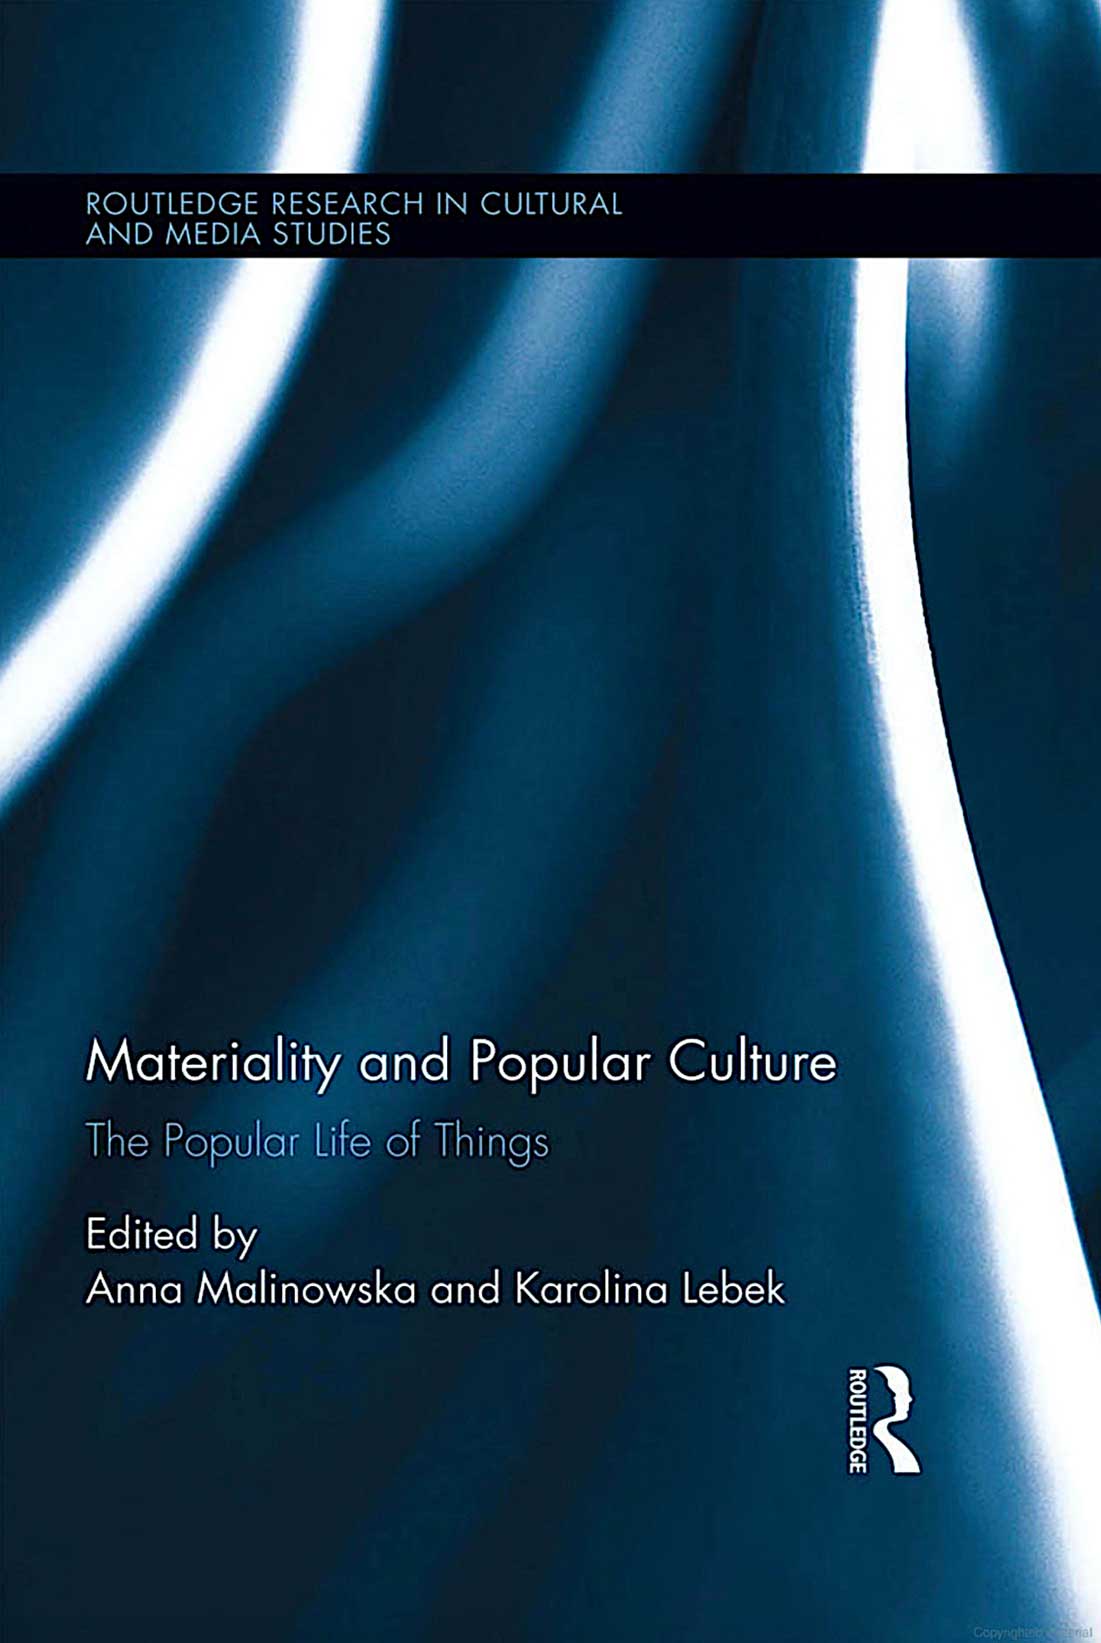 Cover of Materiality and Popular Culture (Routledge)